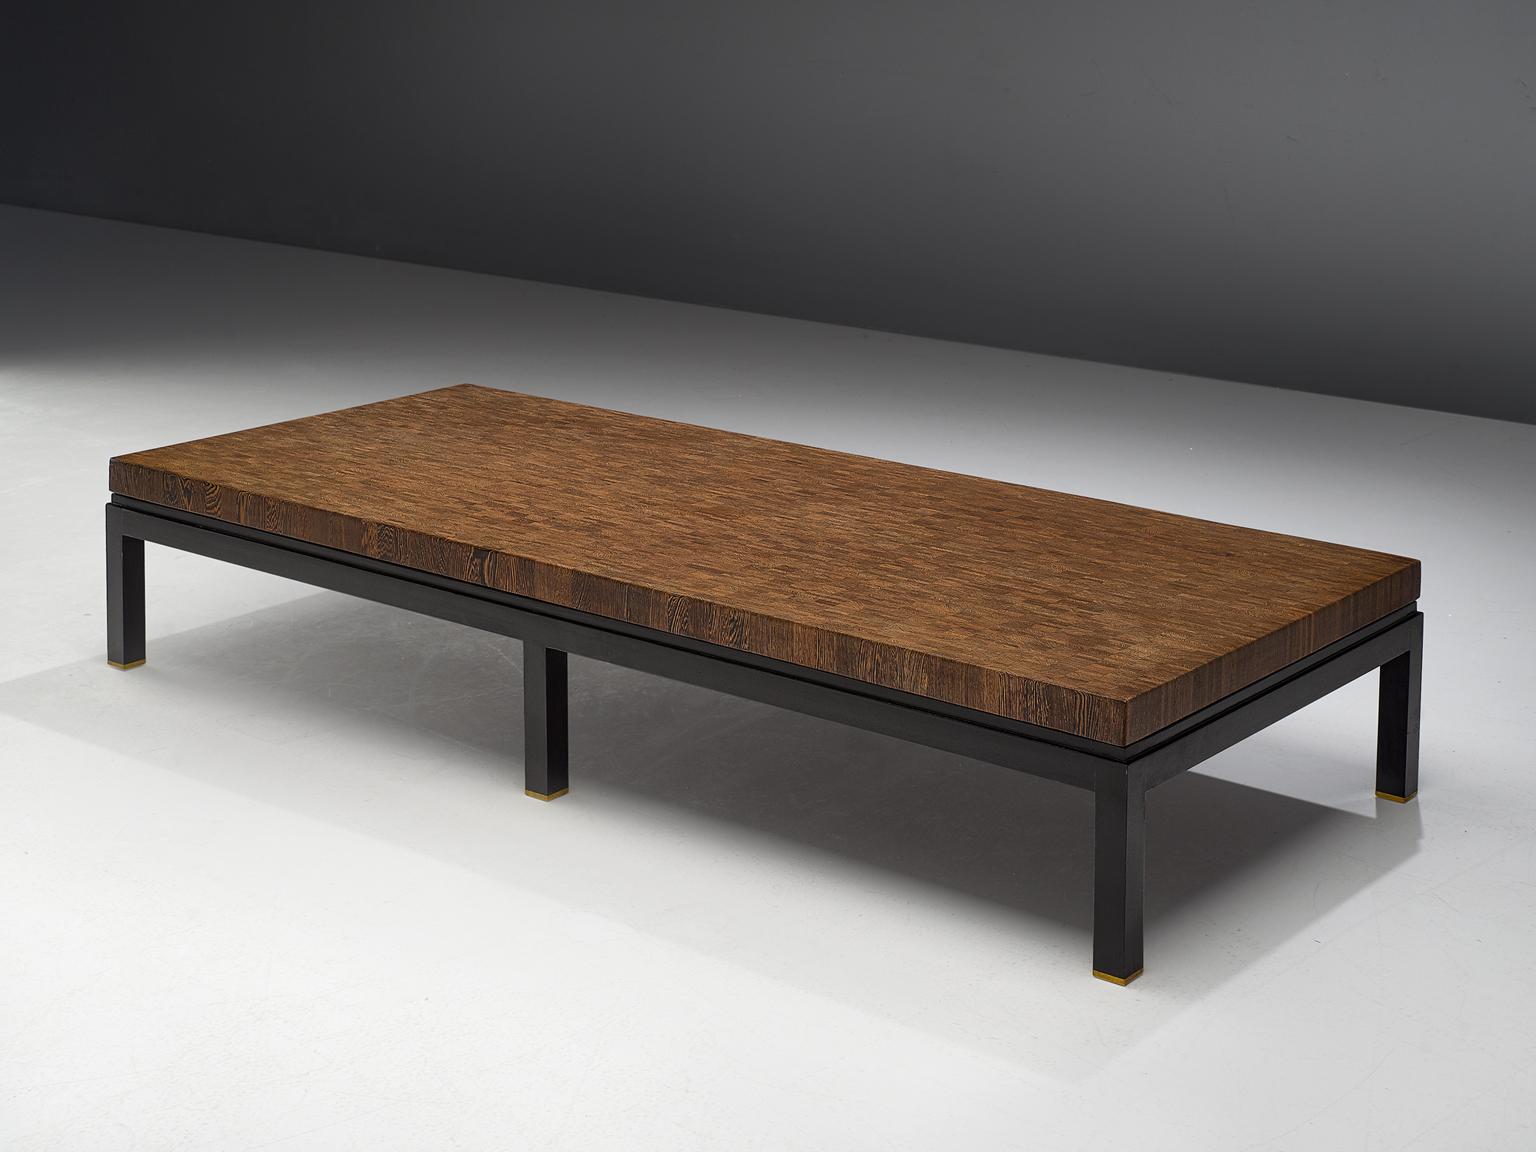 Jules Wabbes, extra large coffee table, wenge, steel, brass, Belgium, circa 1970. 

Well designed and custom made low rectangular table with end grain wooden top in wenge. The length of this particular table is truly exceptional and unique. The